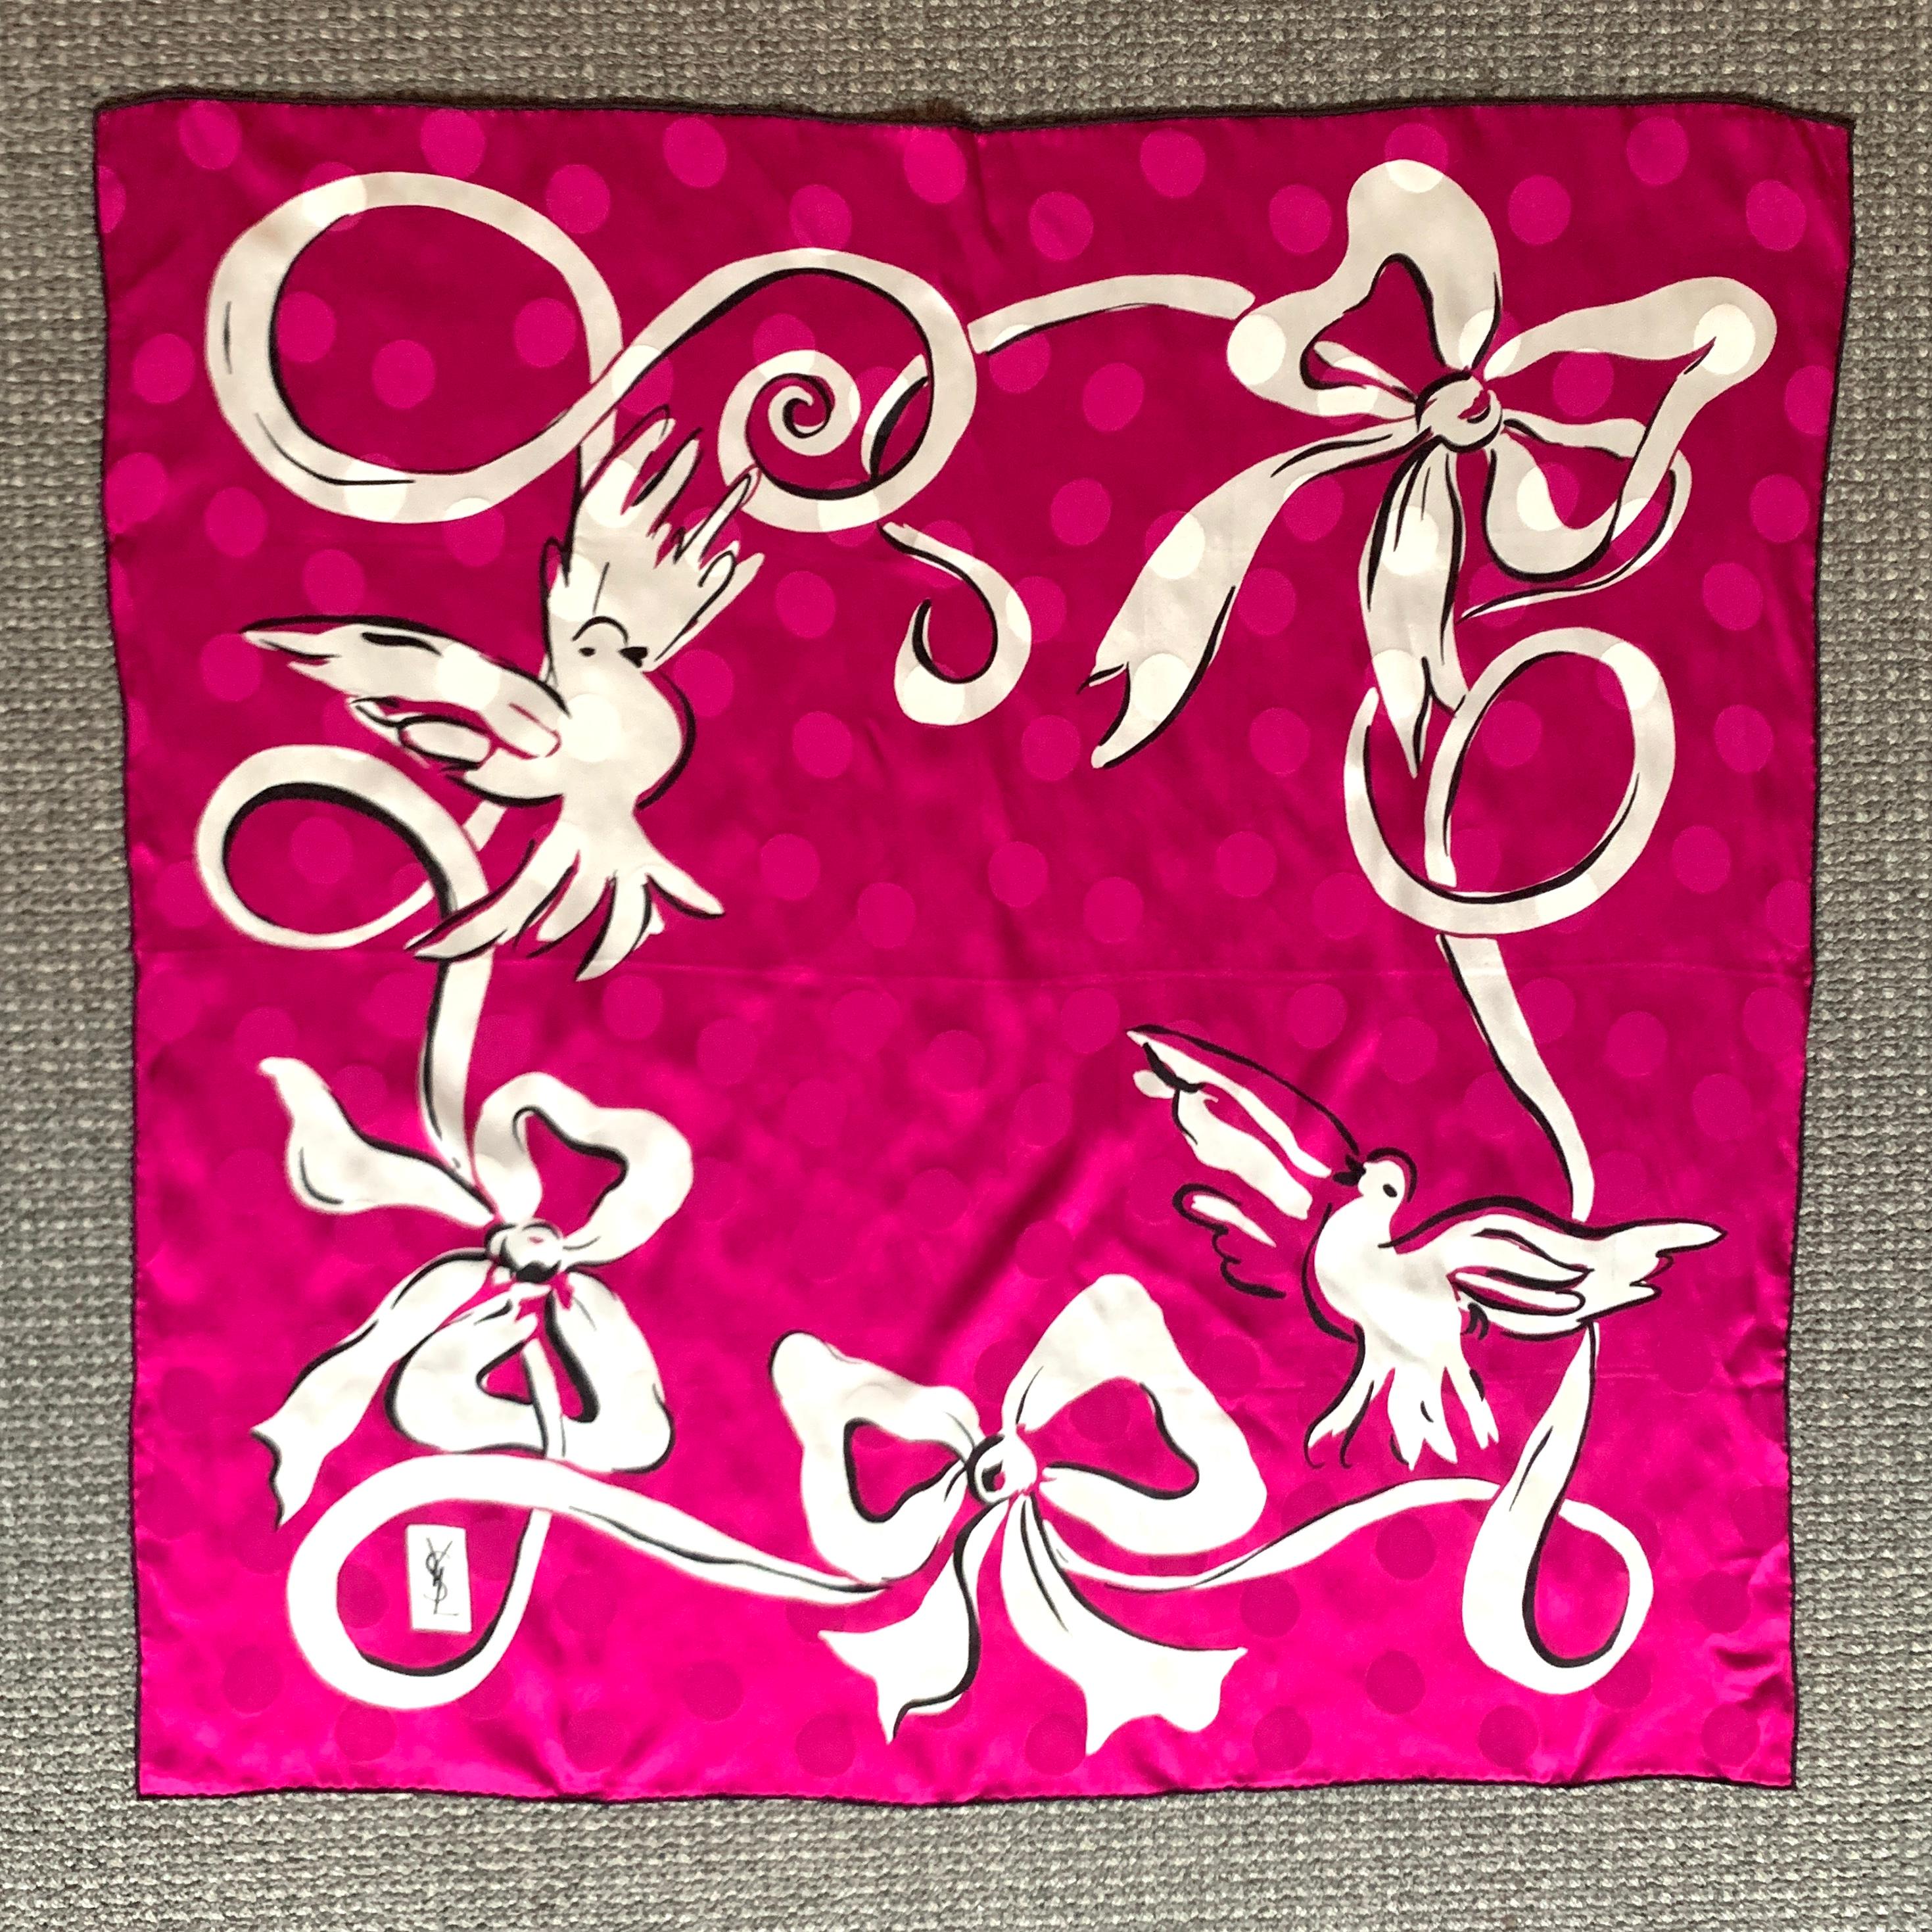 Yves Saint Laurent vintage scarf in a magenta and white dove and ribbon print, featuring jacquard polkadots throughout and black edges. YSL logo at bottom left corner.

100% silk.

Made in Italy.

Approximately 34